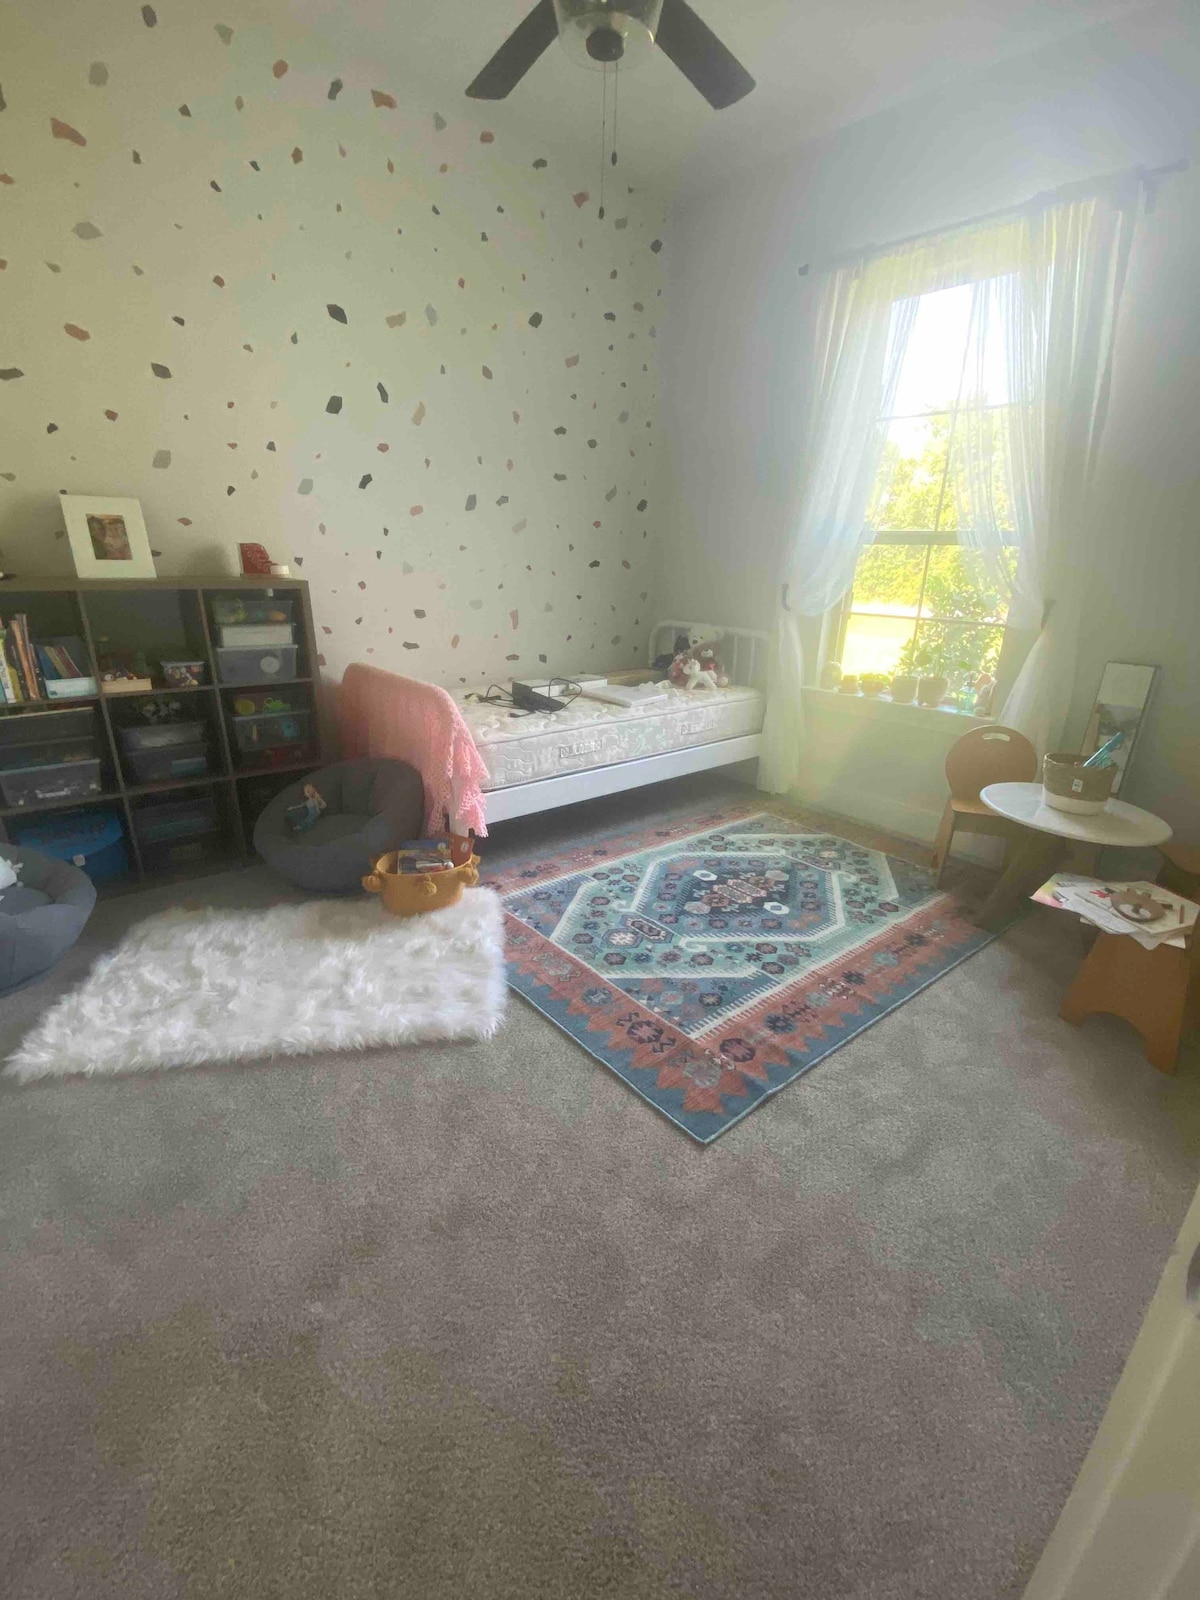 Cheerful 4 bedroom home! Kid and dog friendly